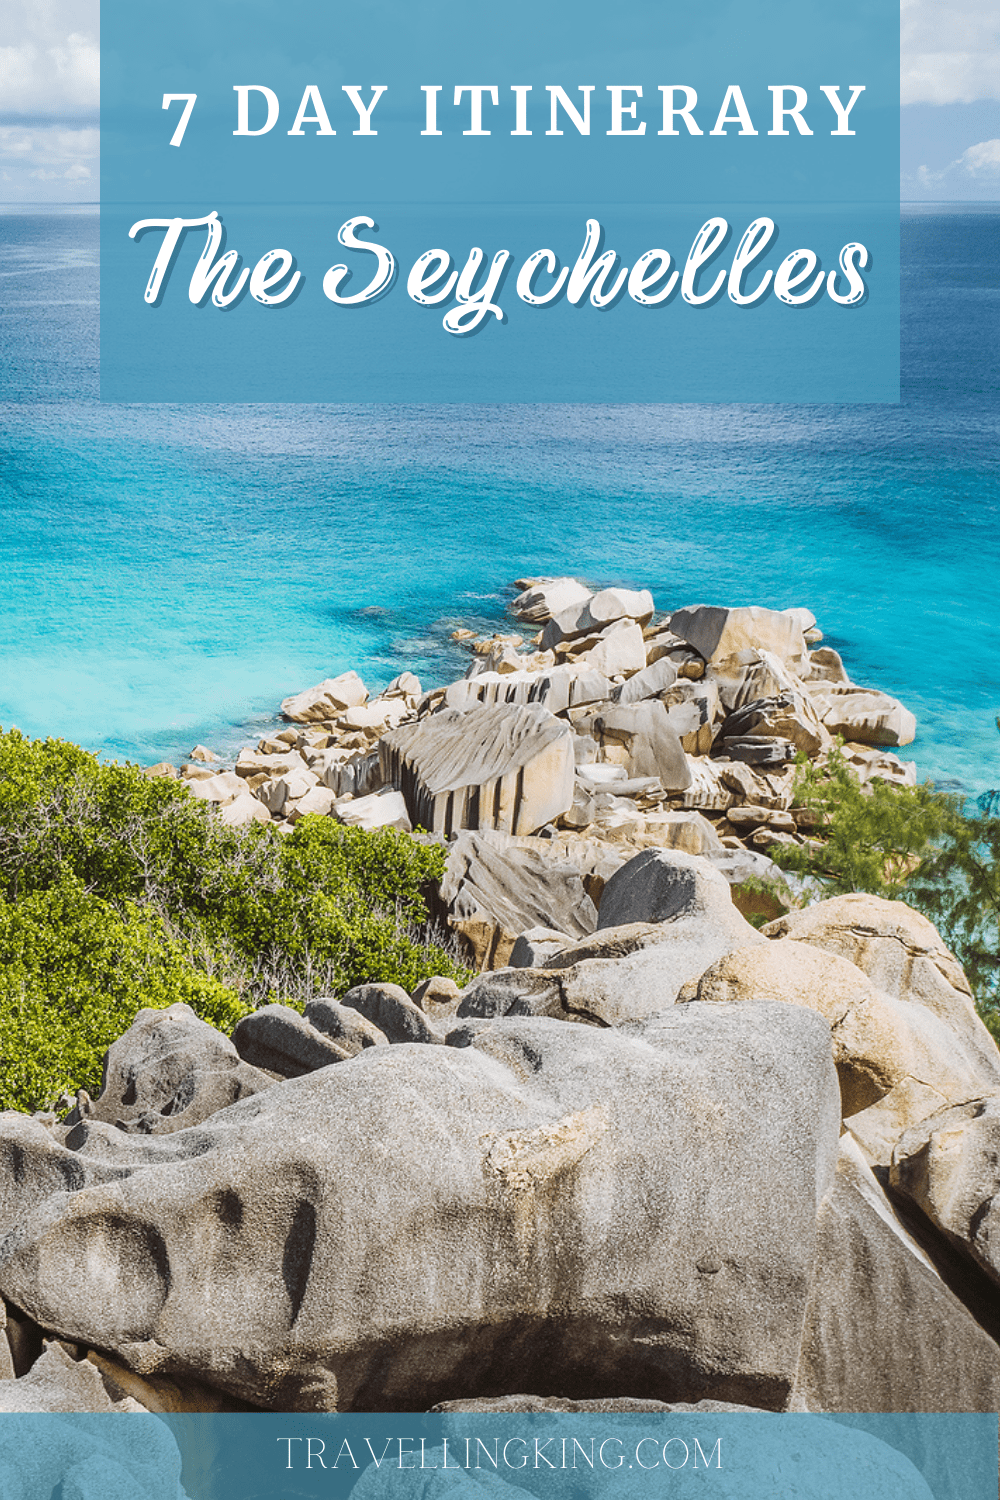 7 Days in the Seychelles - 1 week Itinerary